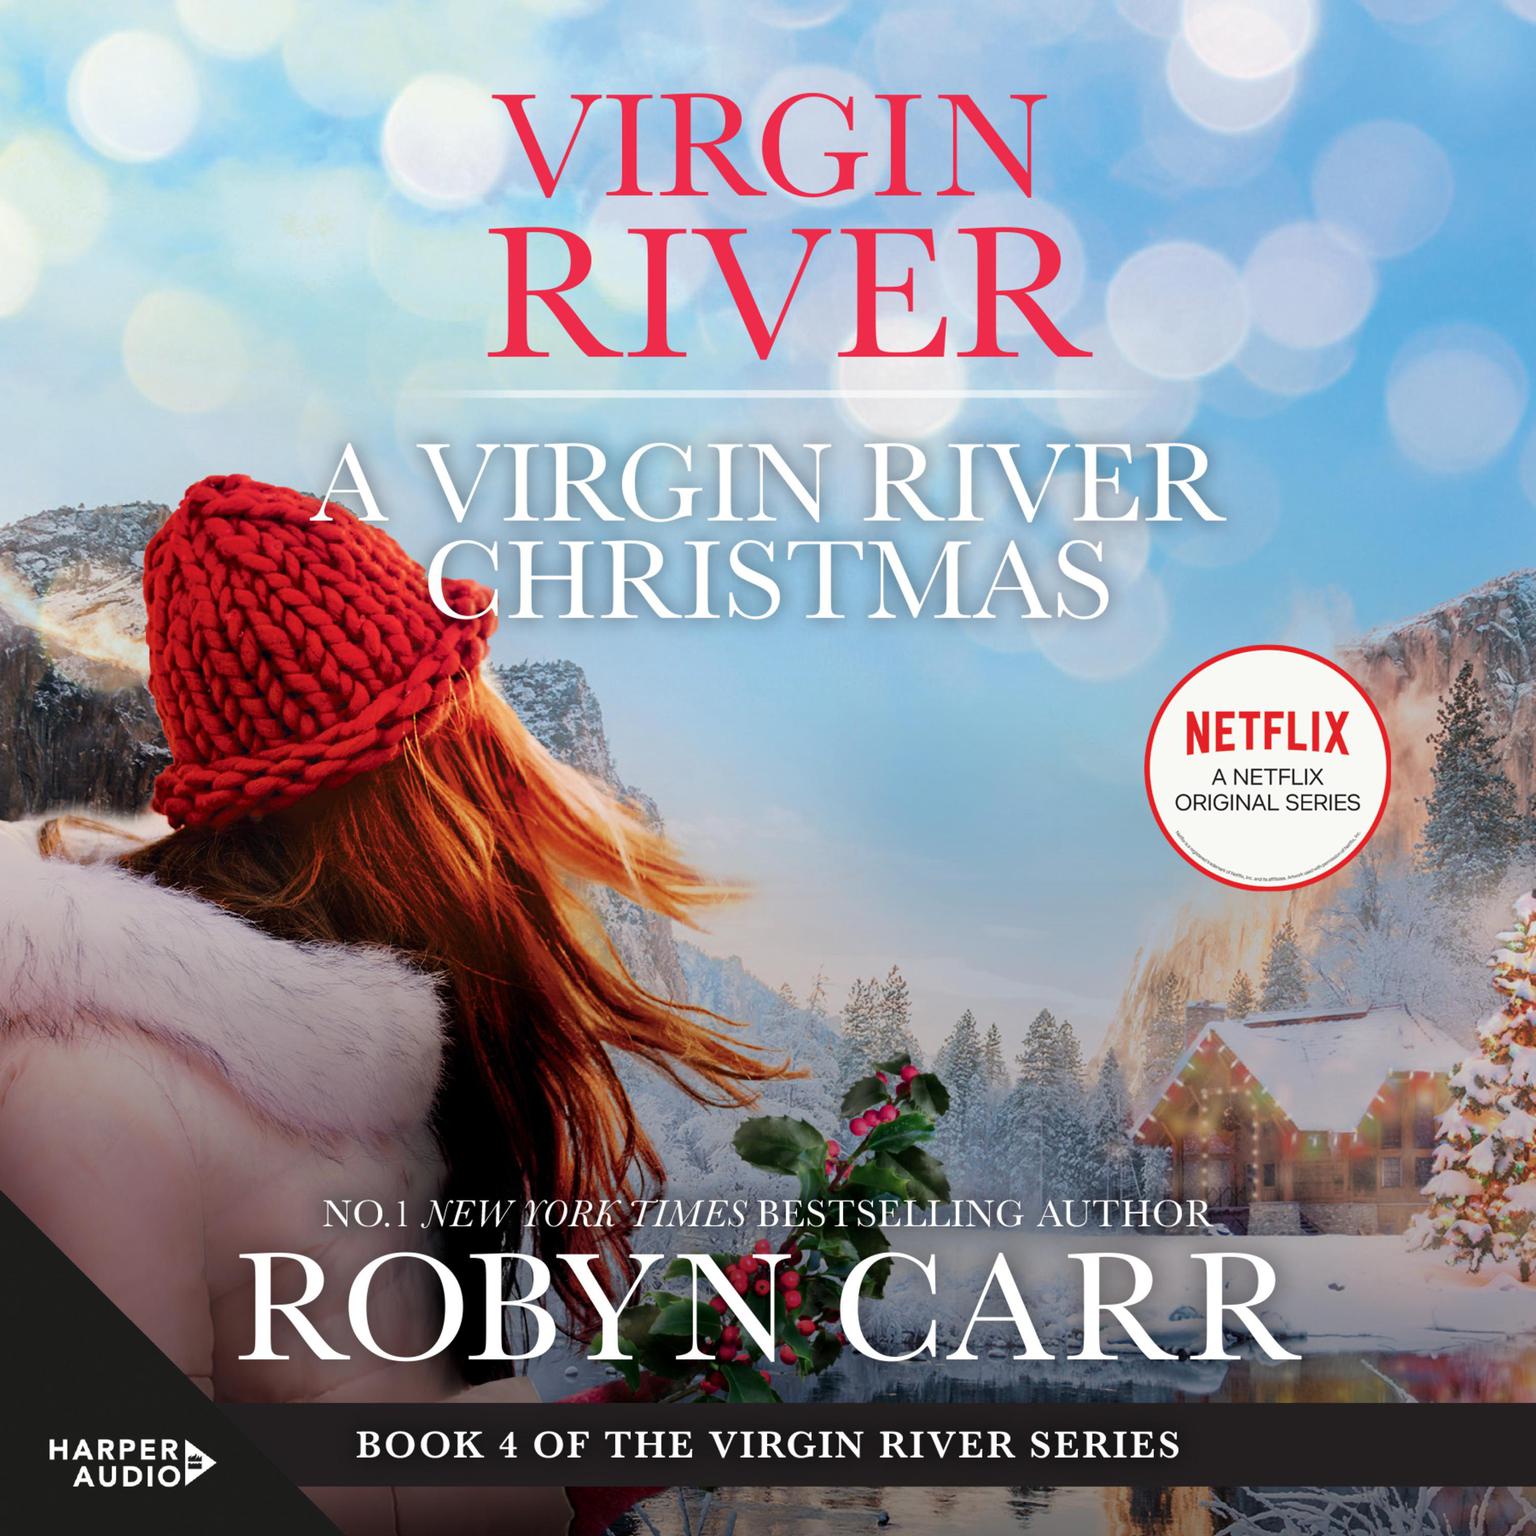 A Virgin River Christmas Audiobook, by Robyn Carr